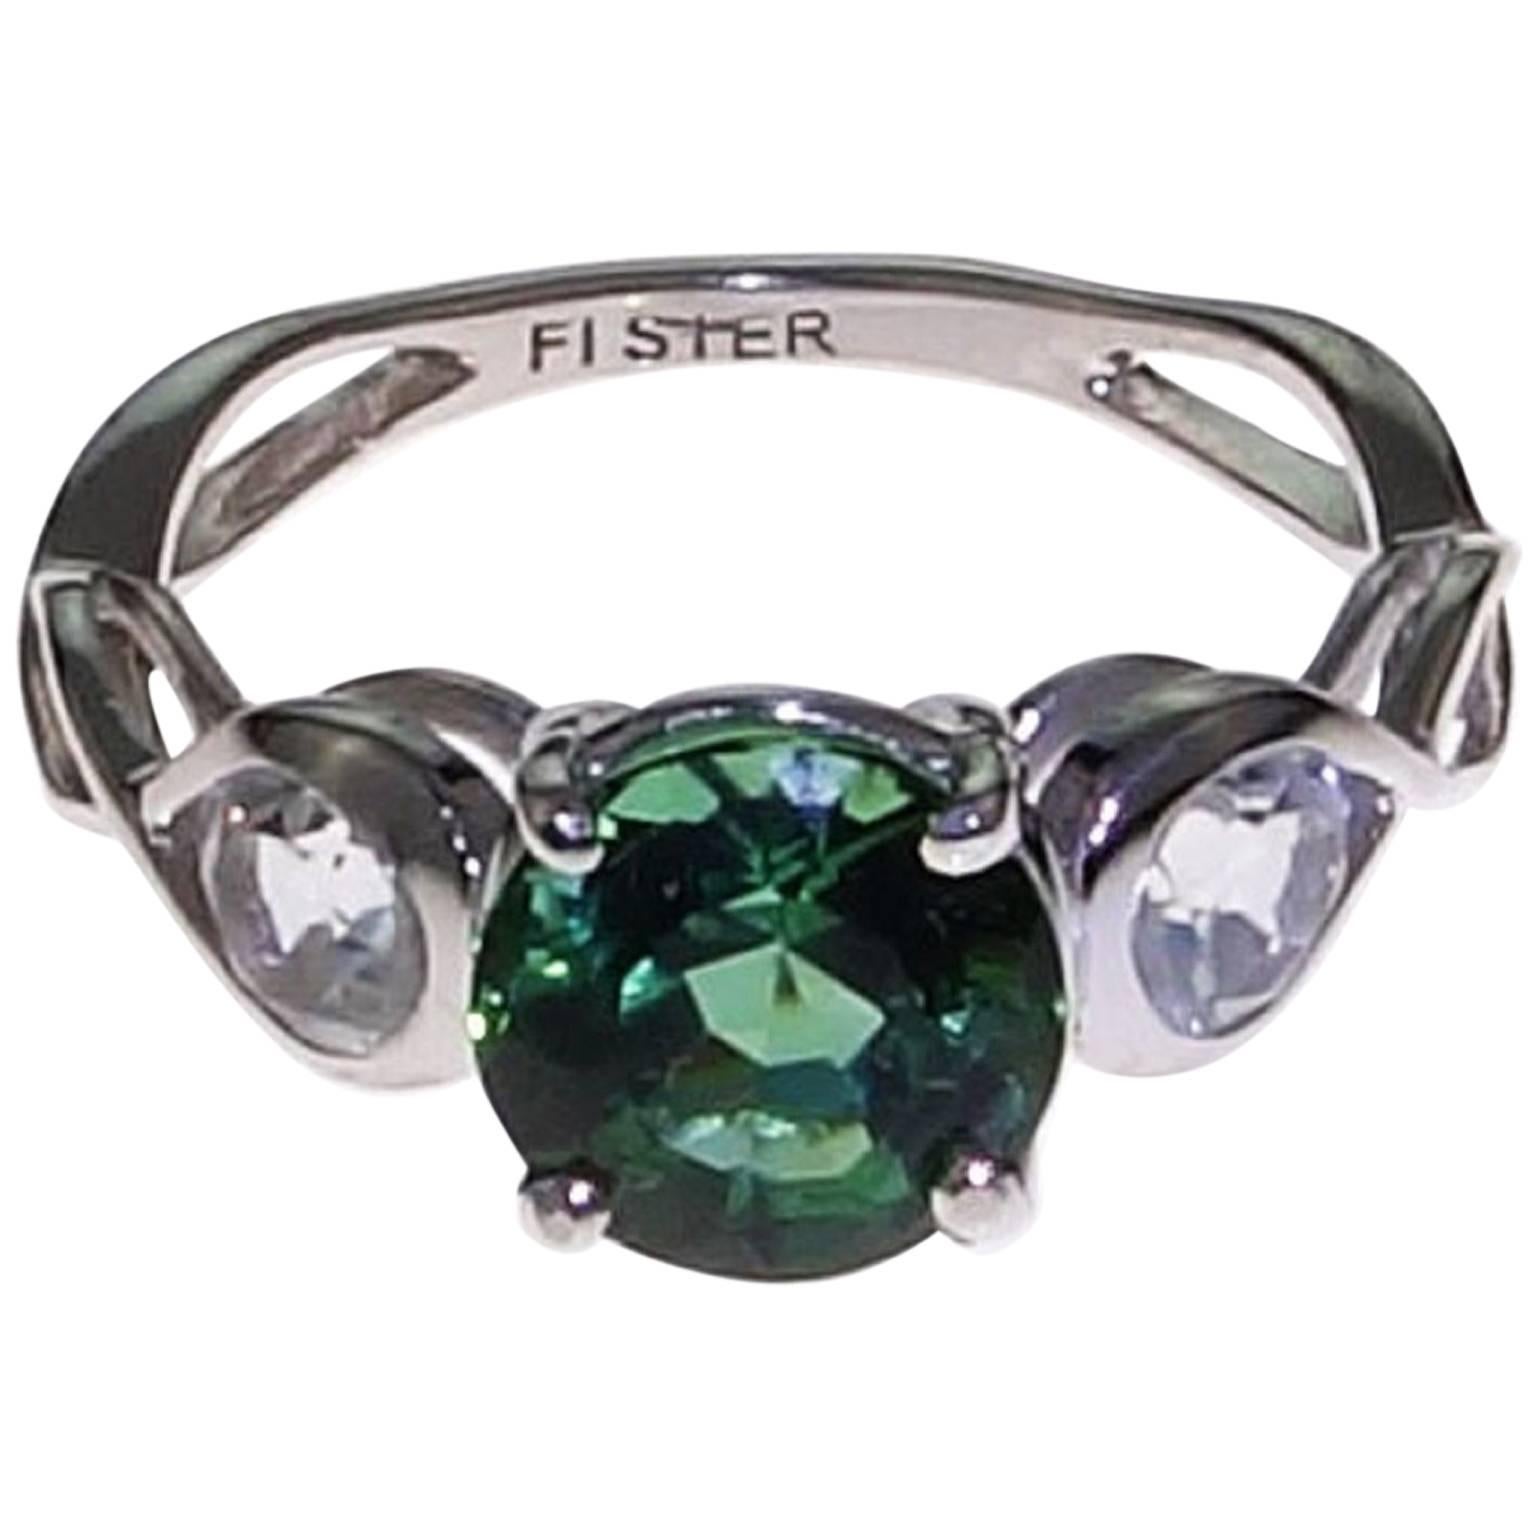 Custom made Sterling Silver ring with Flashing Round Greenish Blue Brazilian Tourmaline of 2 carats. This Gemjunky unique ring features two accent Silver Topaz gemstones of 0.80 carats. This gorgeous lively Tourmaline is straight from Minas Gerais,